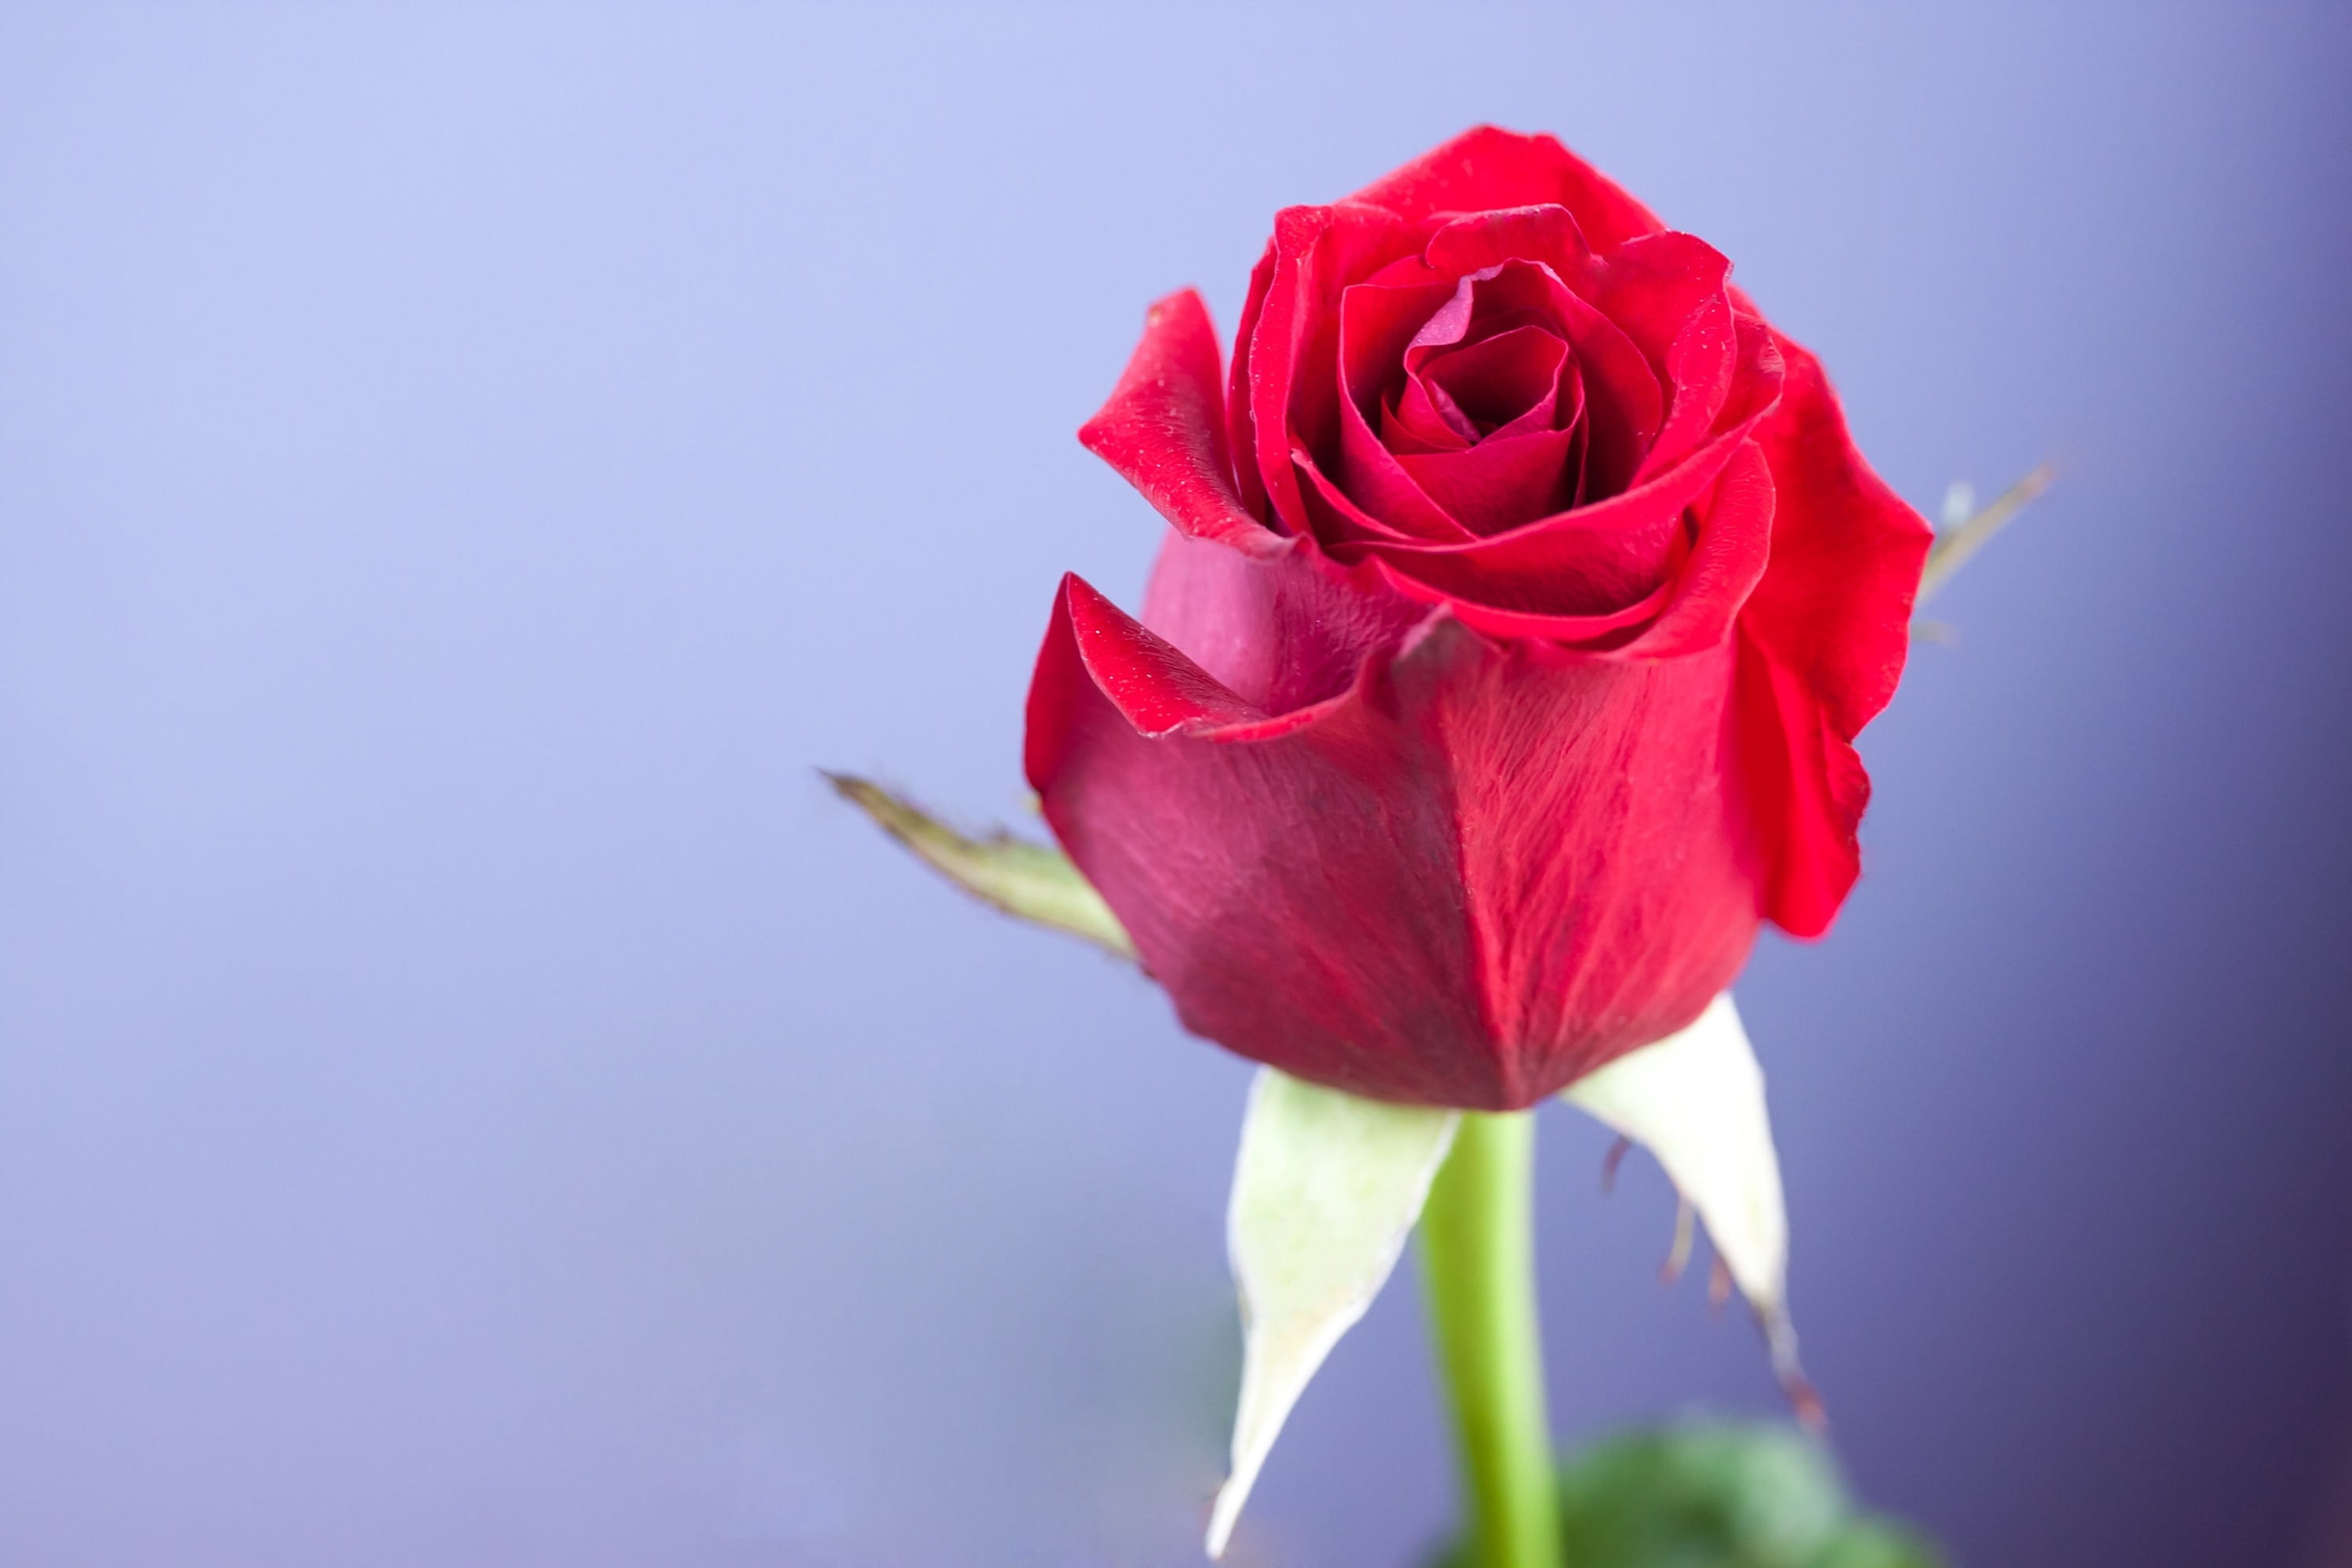 rose, flower, flowers, romantic, beauty, red, love, nature